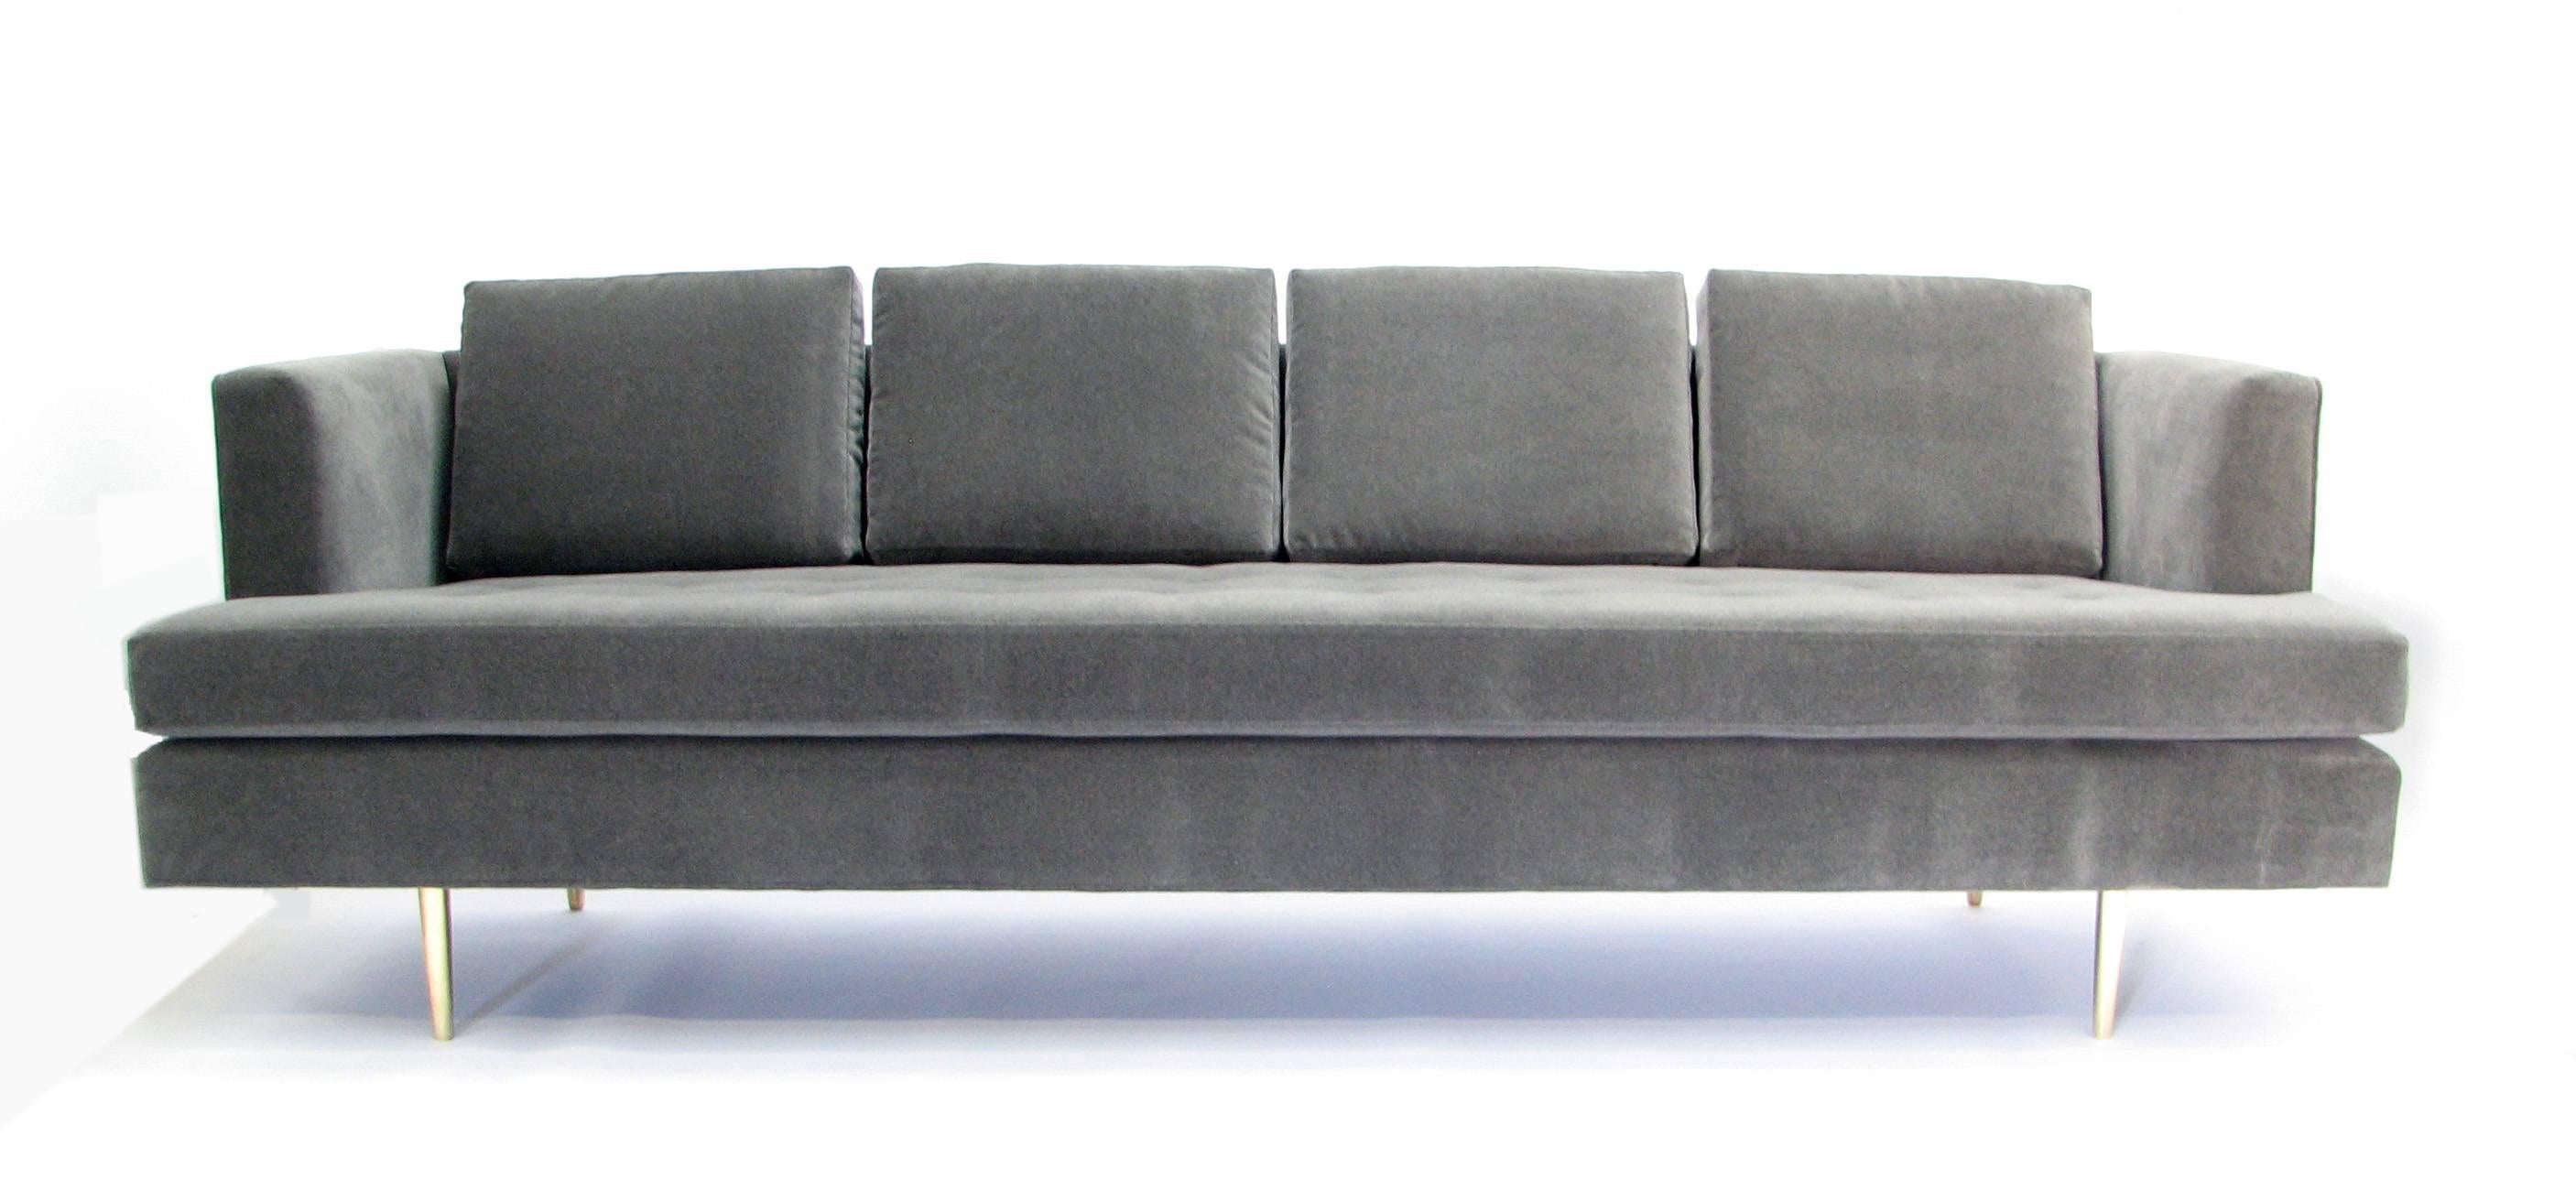 Stunning Mid-Century Dunbar Sofa by Edward Wormley in New Fabric In Excellent Condition For Sale In Portland, OR